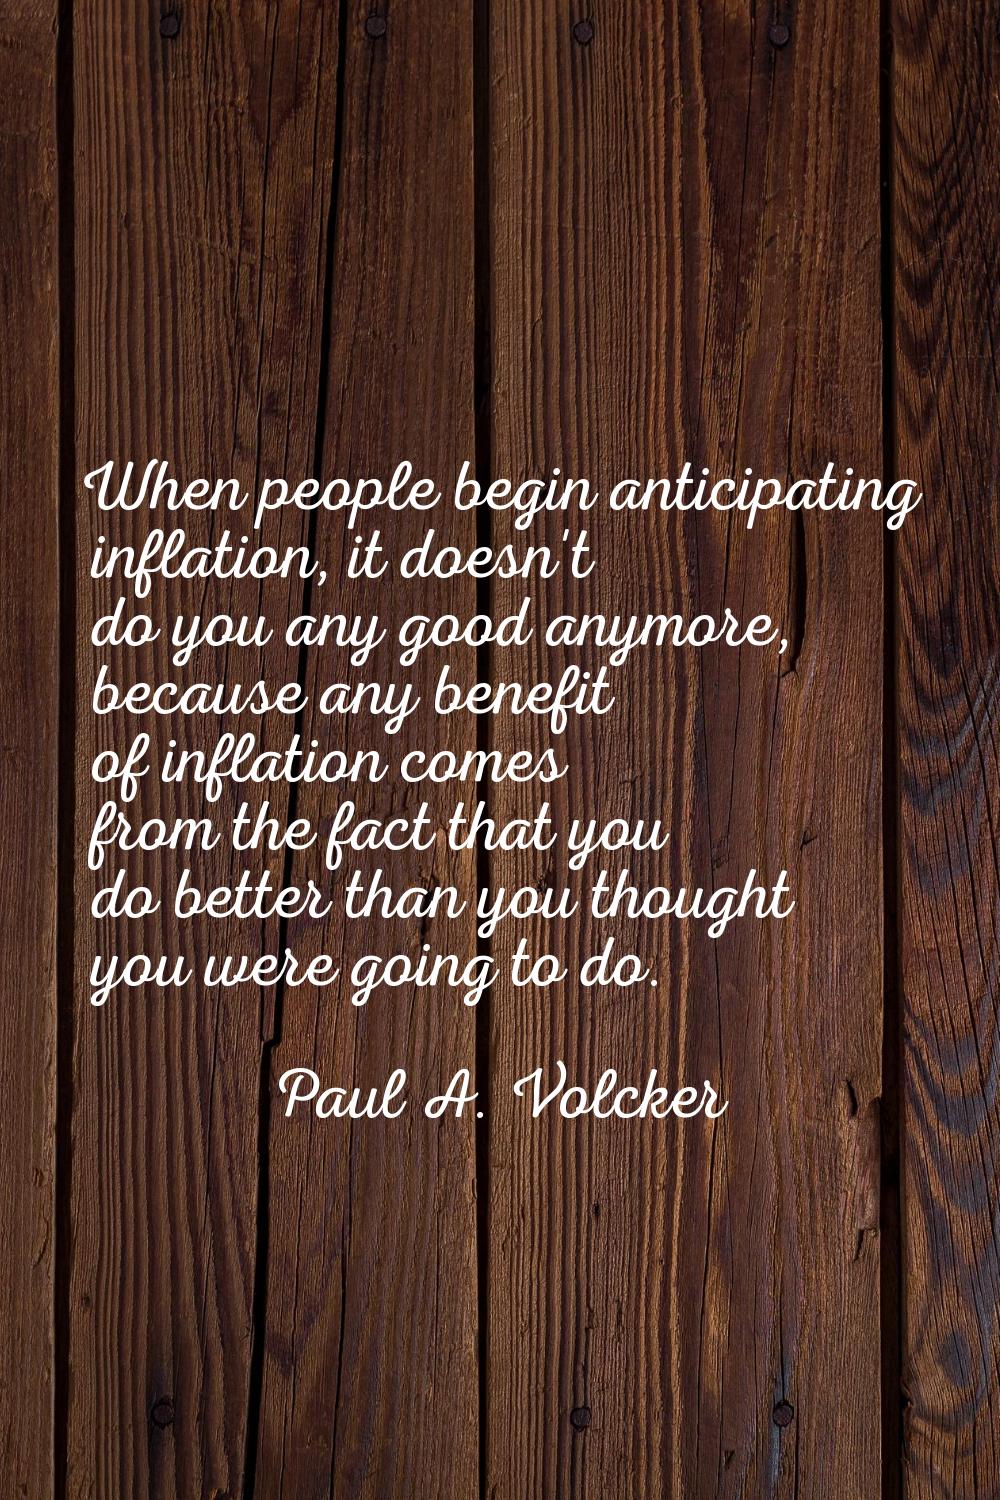 When people begin anticipating inflation, it doesn't do you any good anymore, because any benefit o